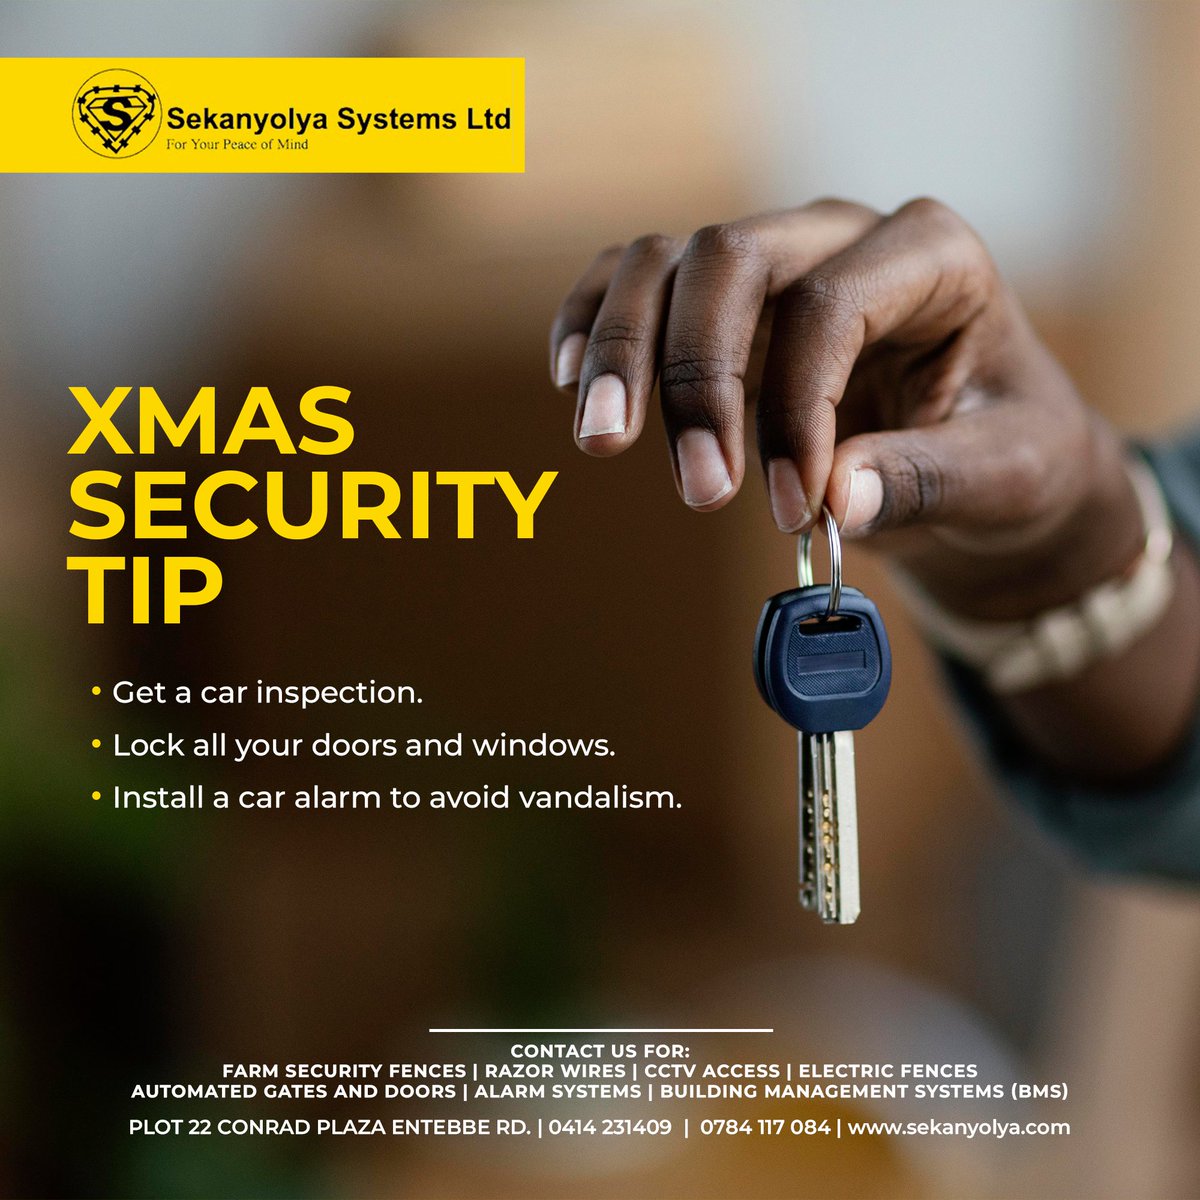 Here are a few security tips for you before you travel for Christmas;

#SecurityTip
#ForYourPeaceOfMind
#SekanyolyaSystemsLtd